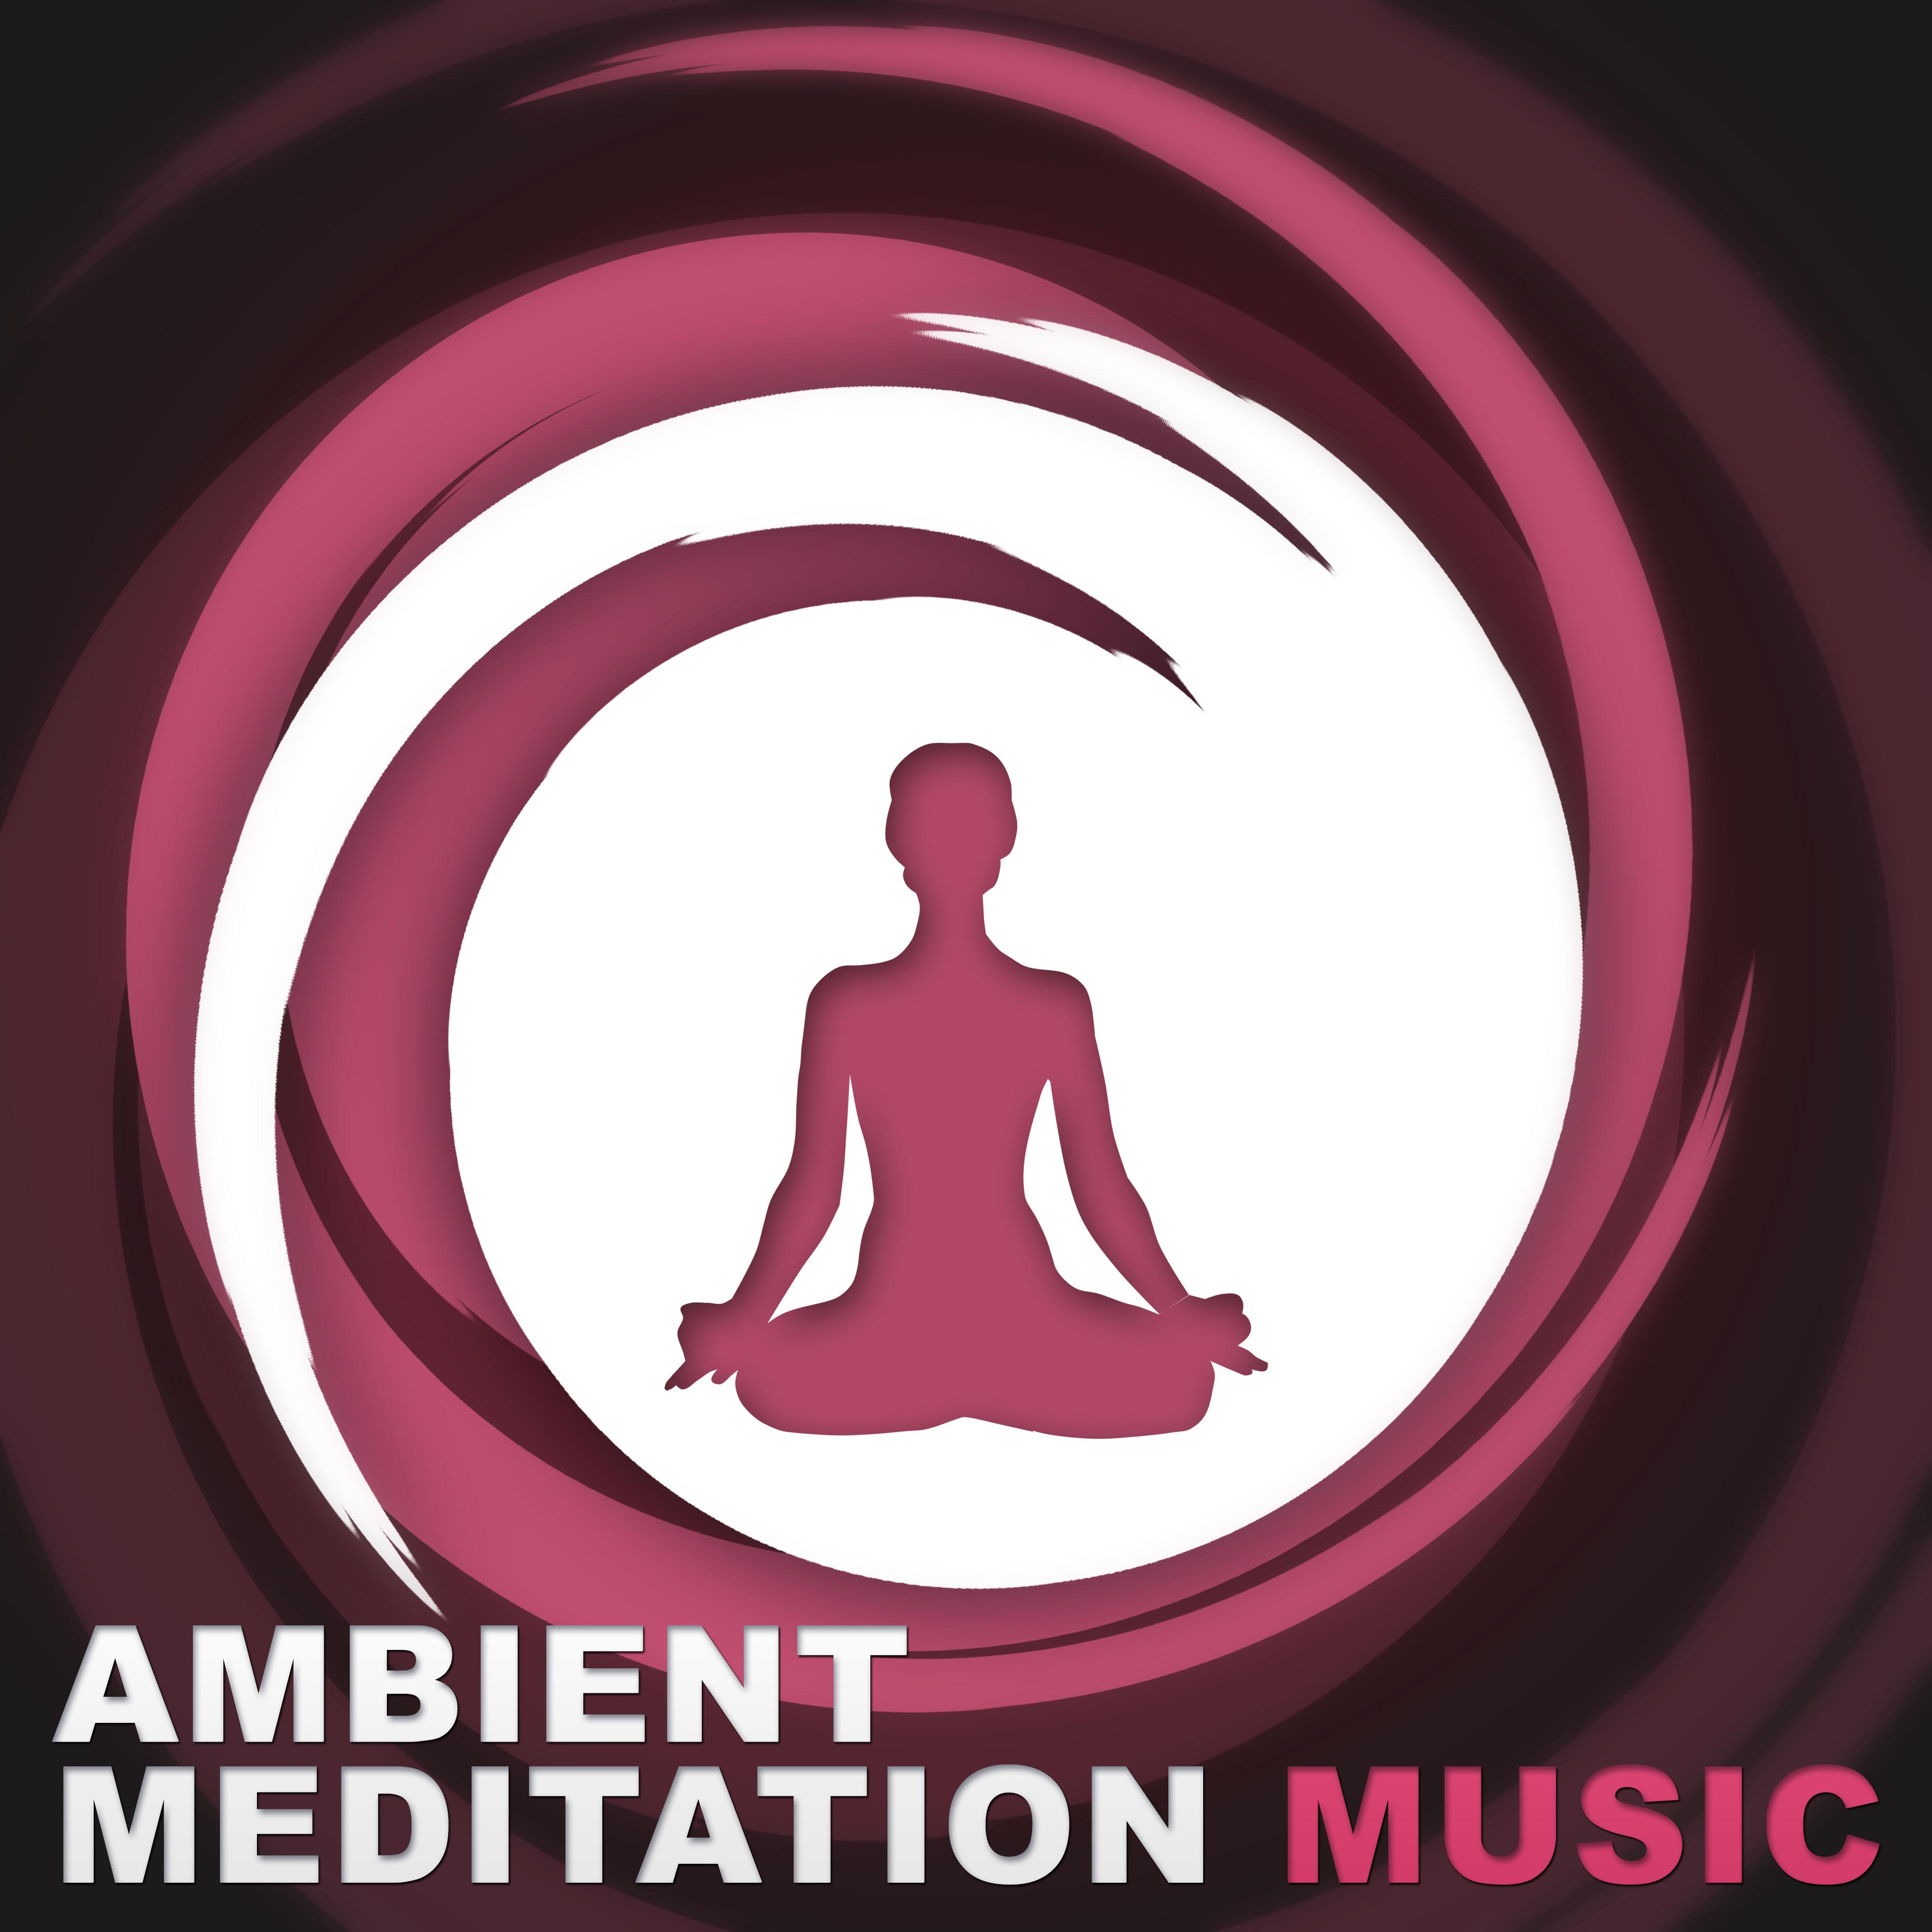 Ambient Meditation Music – Sounds of Healing Nature to Deep Meditation, Feel Pure Relaxation, Yoga Music, Sound Therapy